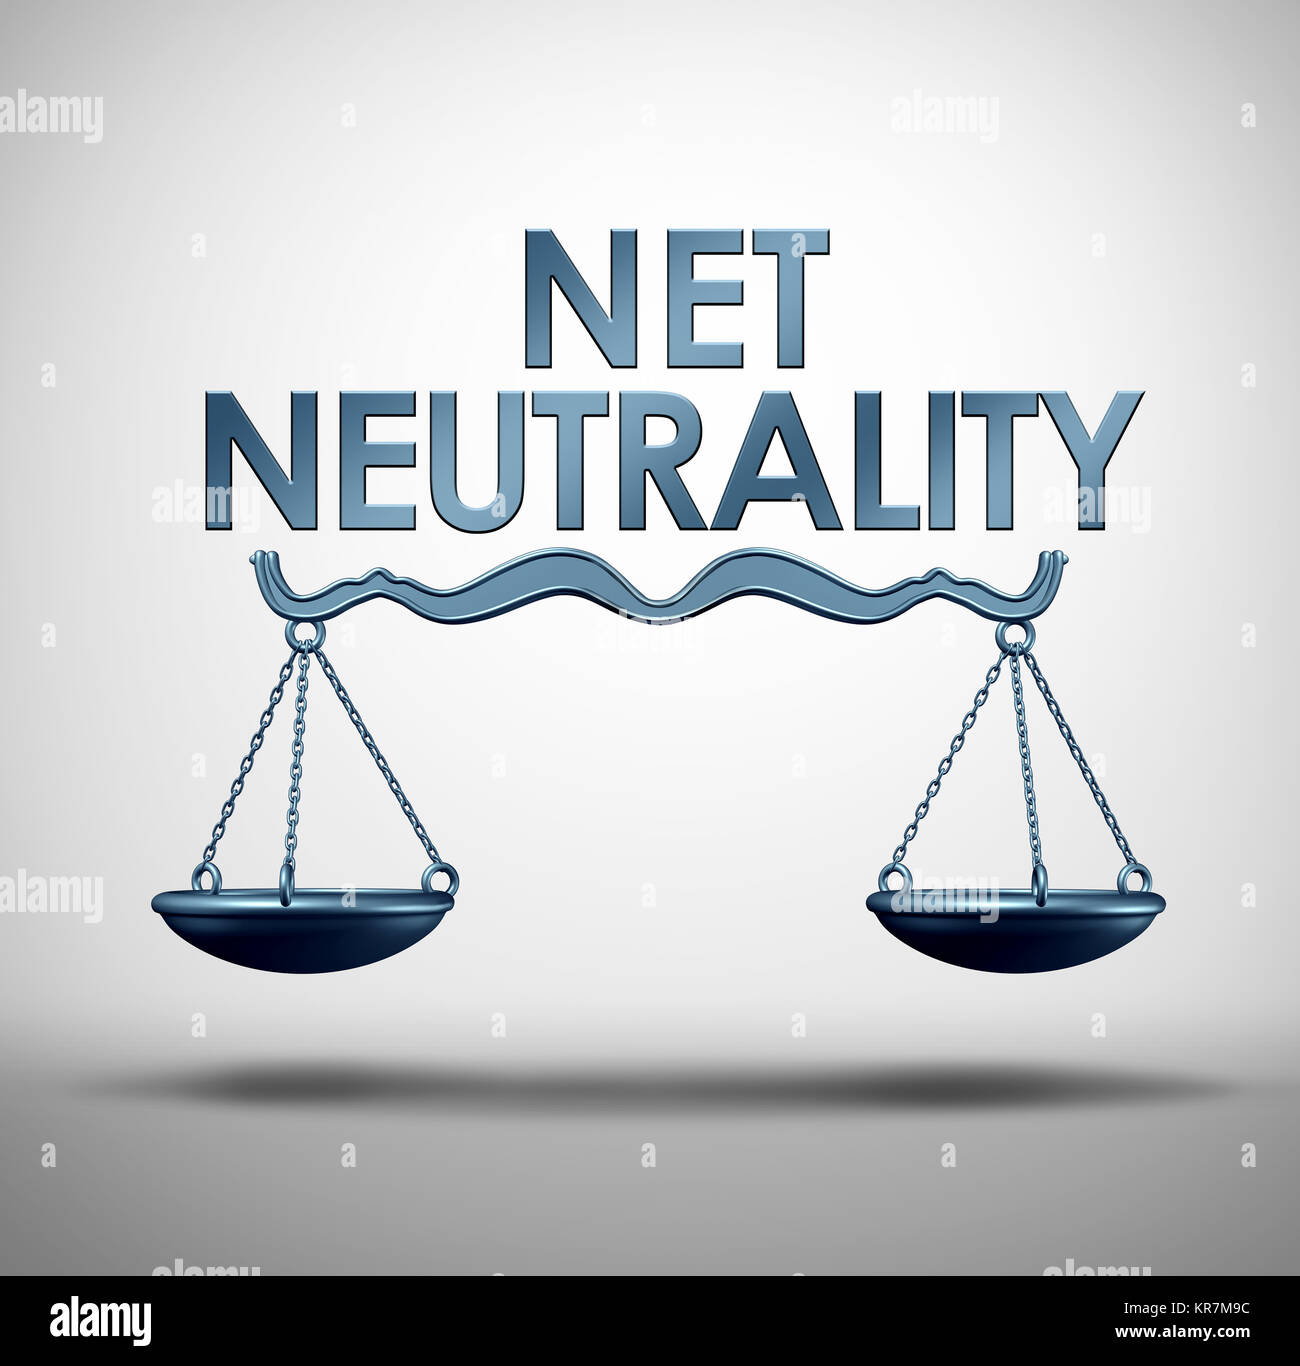 Net neutrality or open internet symbol as a justice scale with text as an online metaphor for standards in access to digital online content. Stock Photo